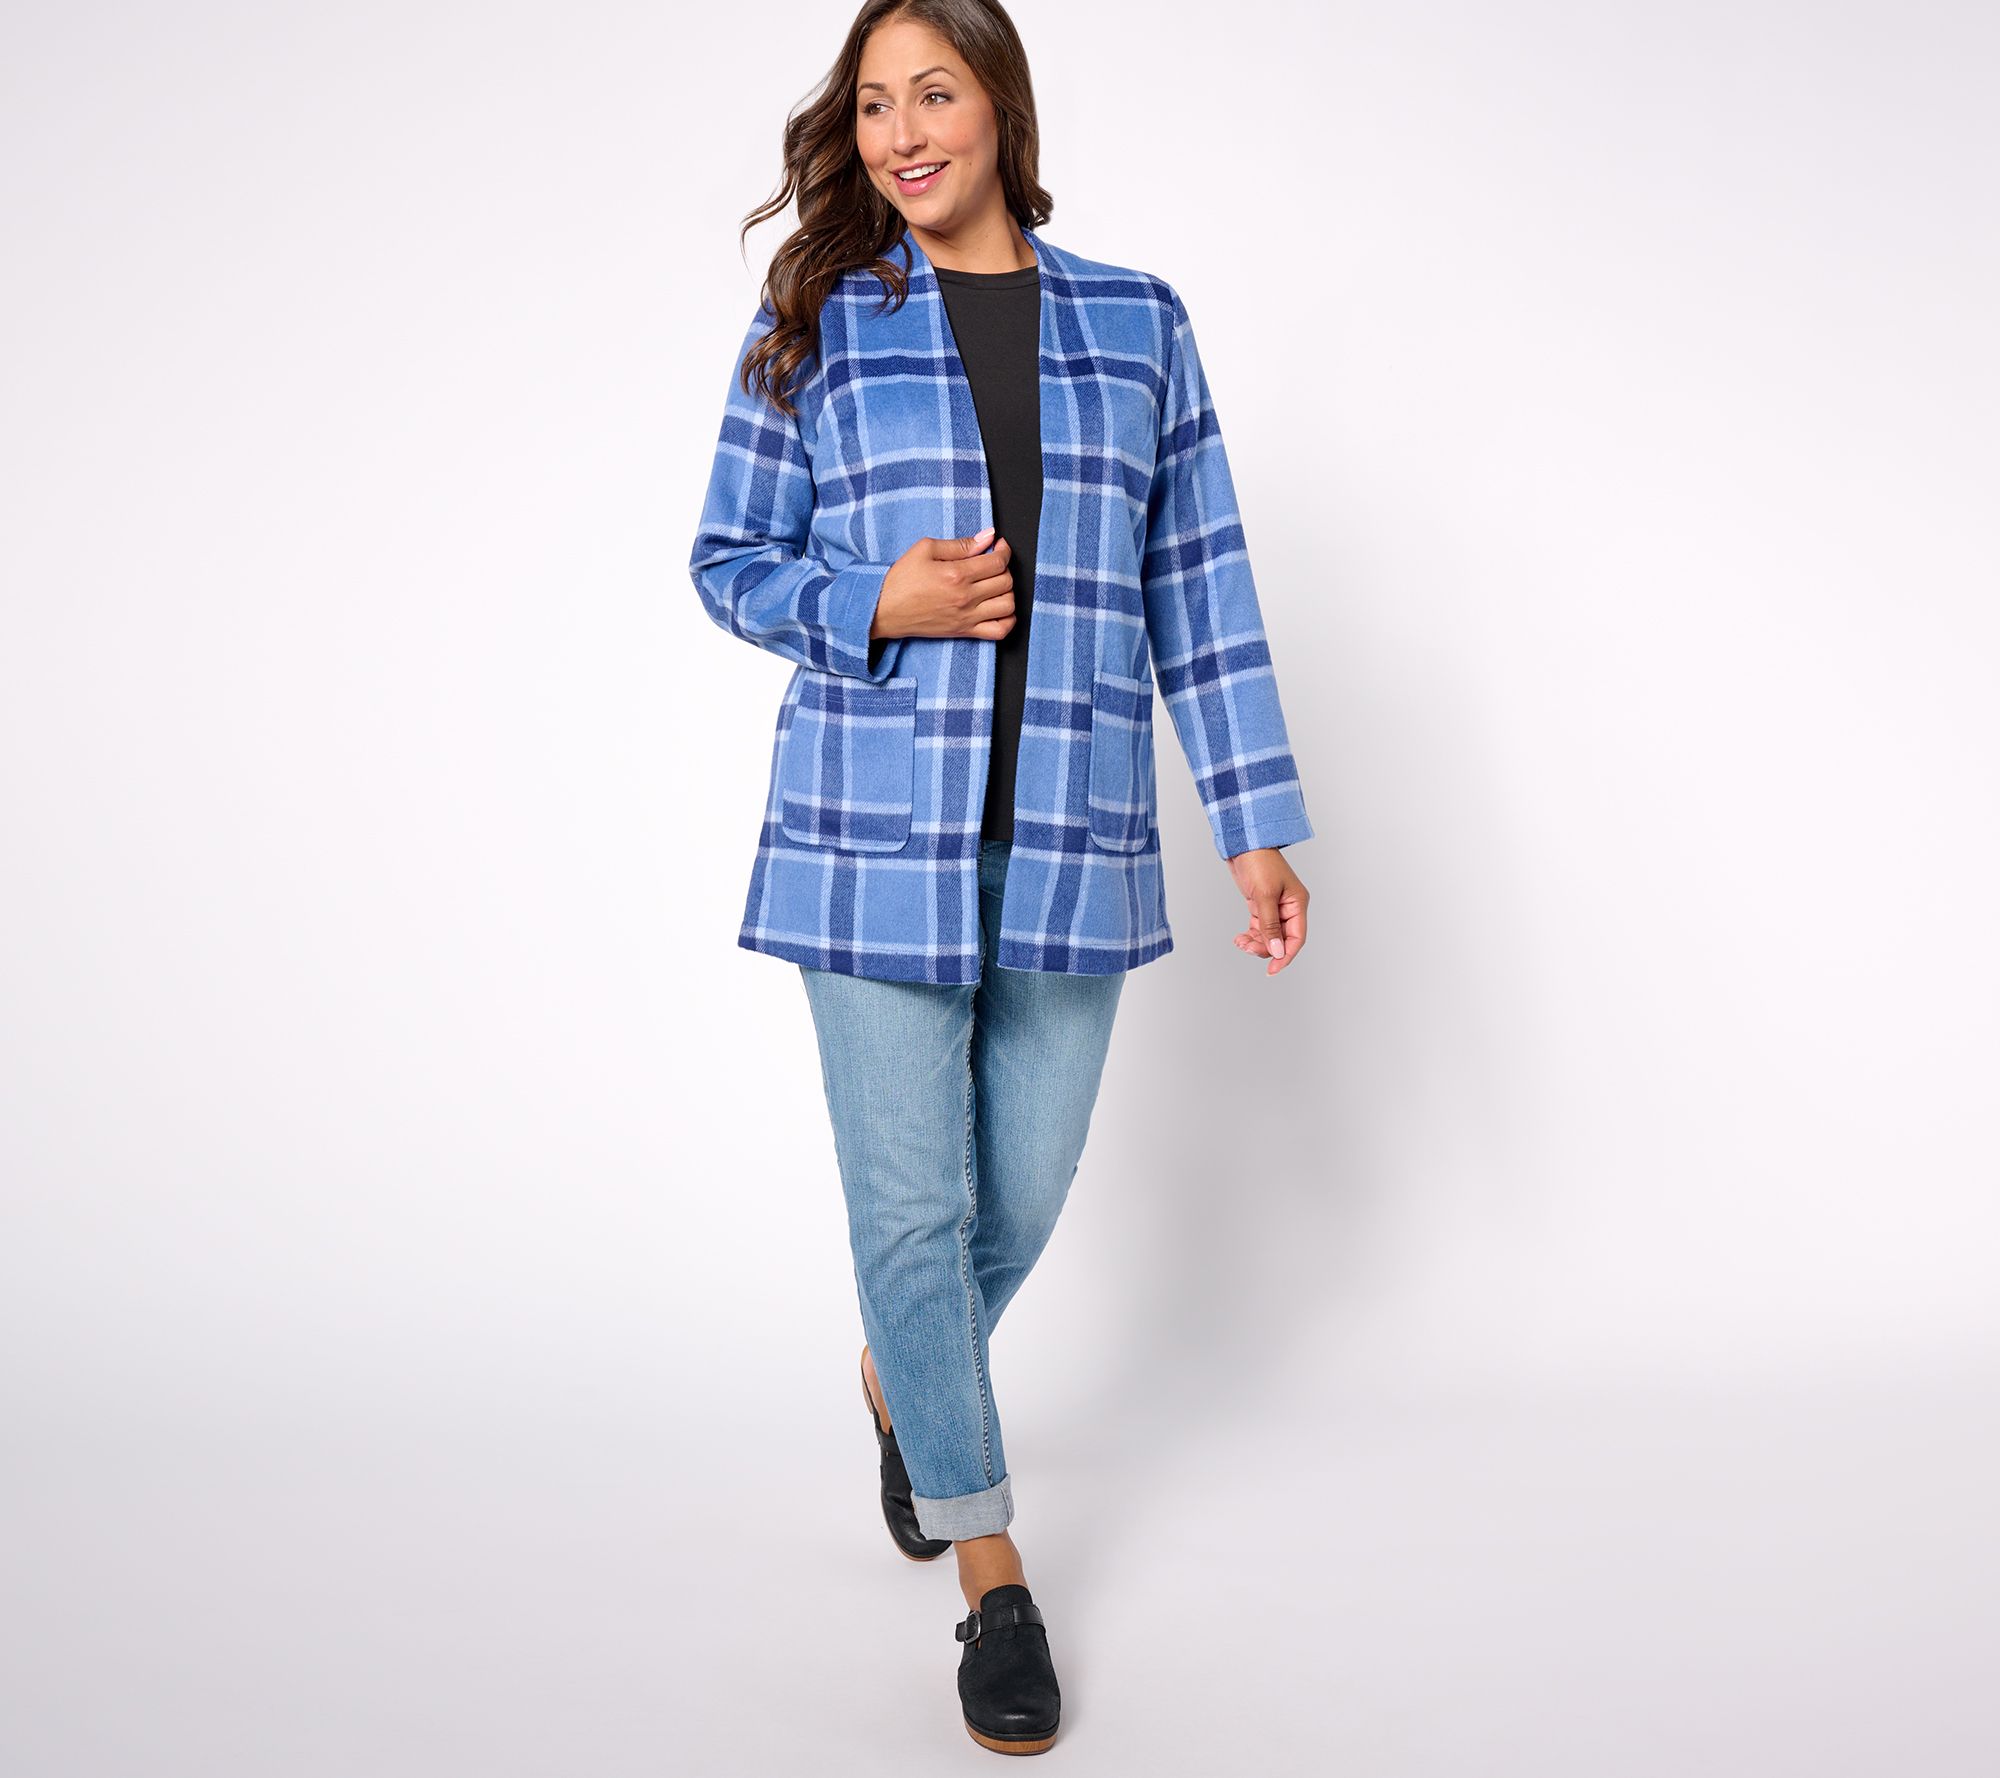 Denim & Co. Plaid Collarless Long Jacket with Pockets